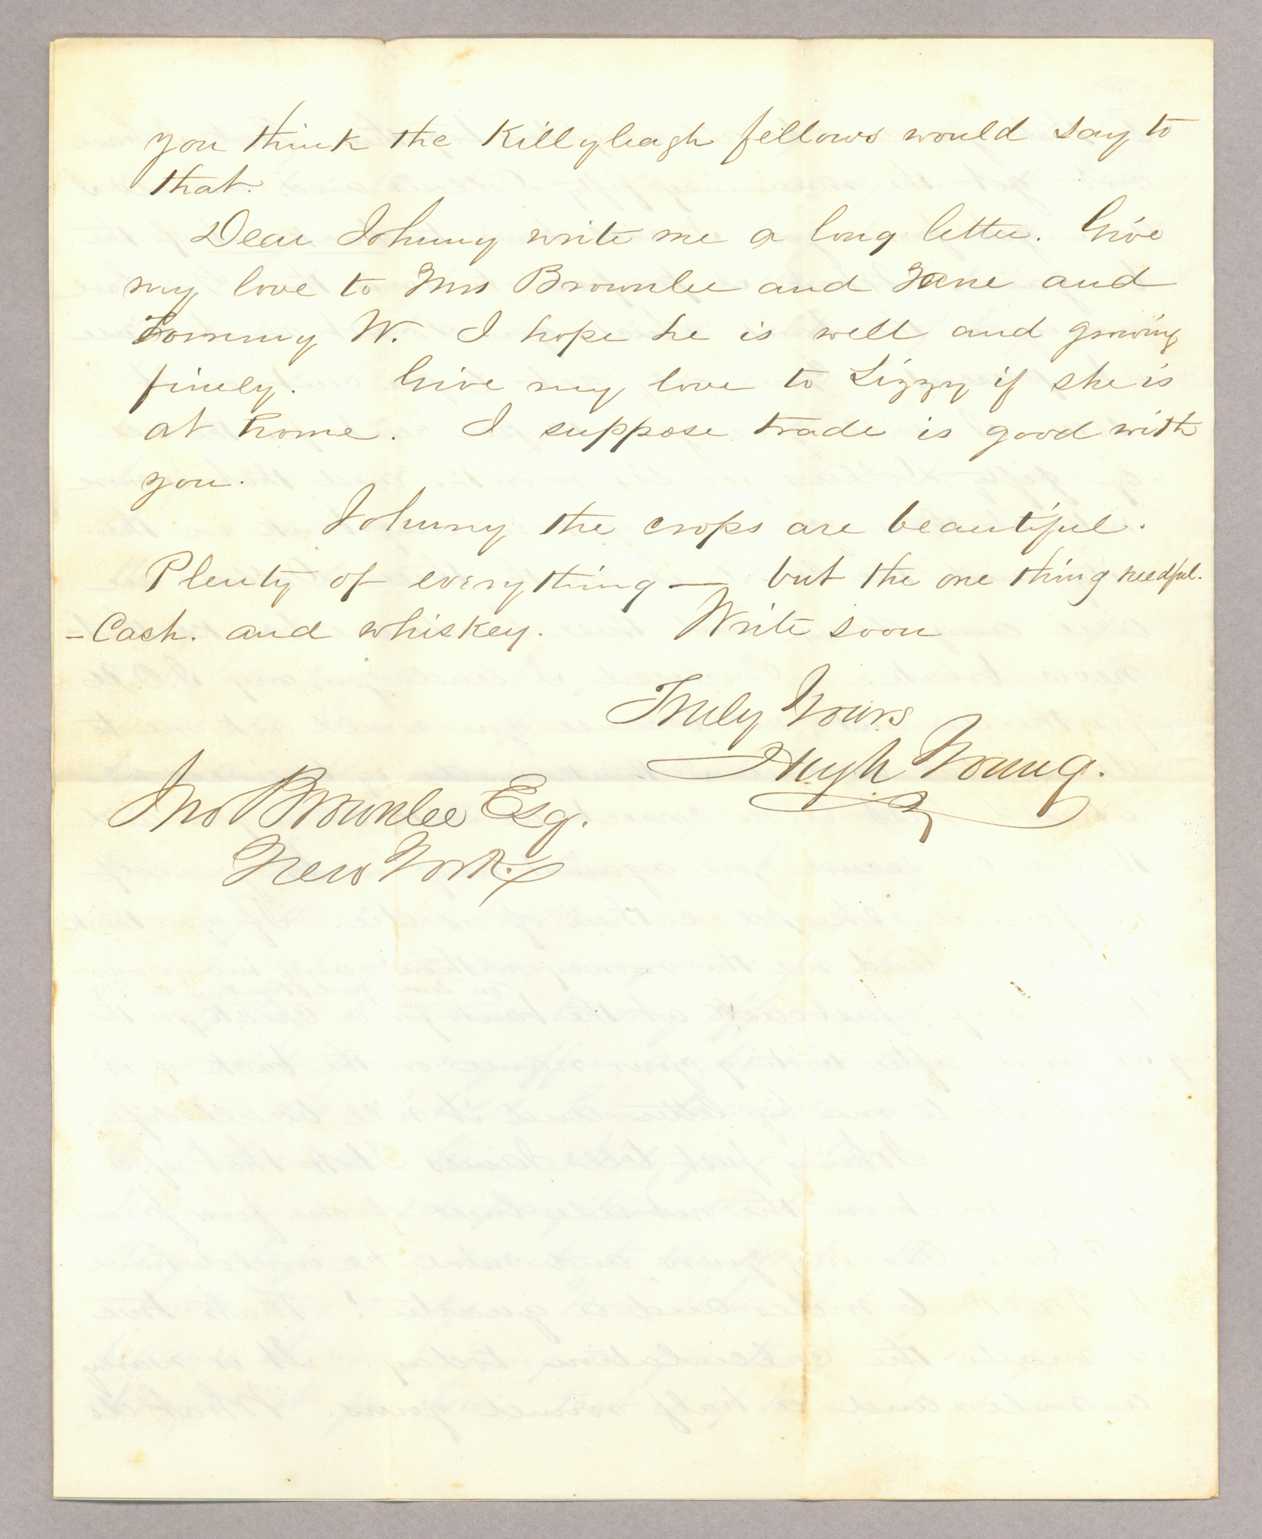 Letter. Hugh Young, Coudersport, Pennsylvania, to Jno Brownlee Esq., New York, New York, Page 4